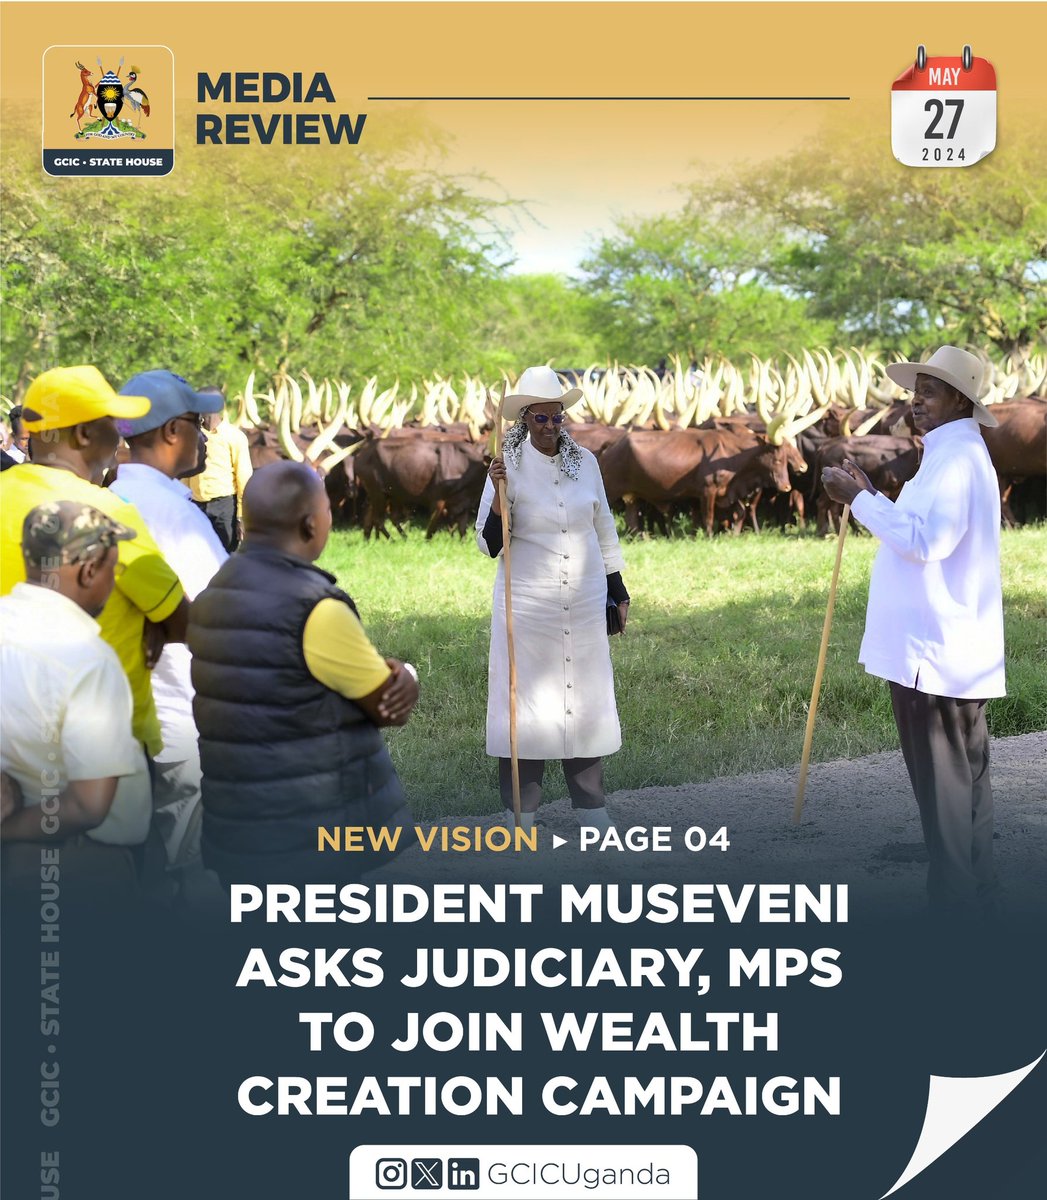 President Yoweri Museveni has taken the three arms of Government (Executive, Judiciary and Parliament) to work together to spread the wealth creation campaign though the four-acre model farming approach.